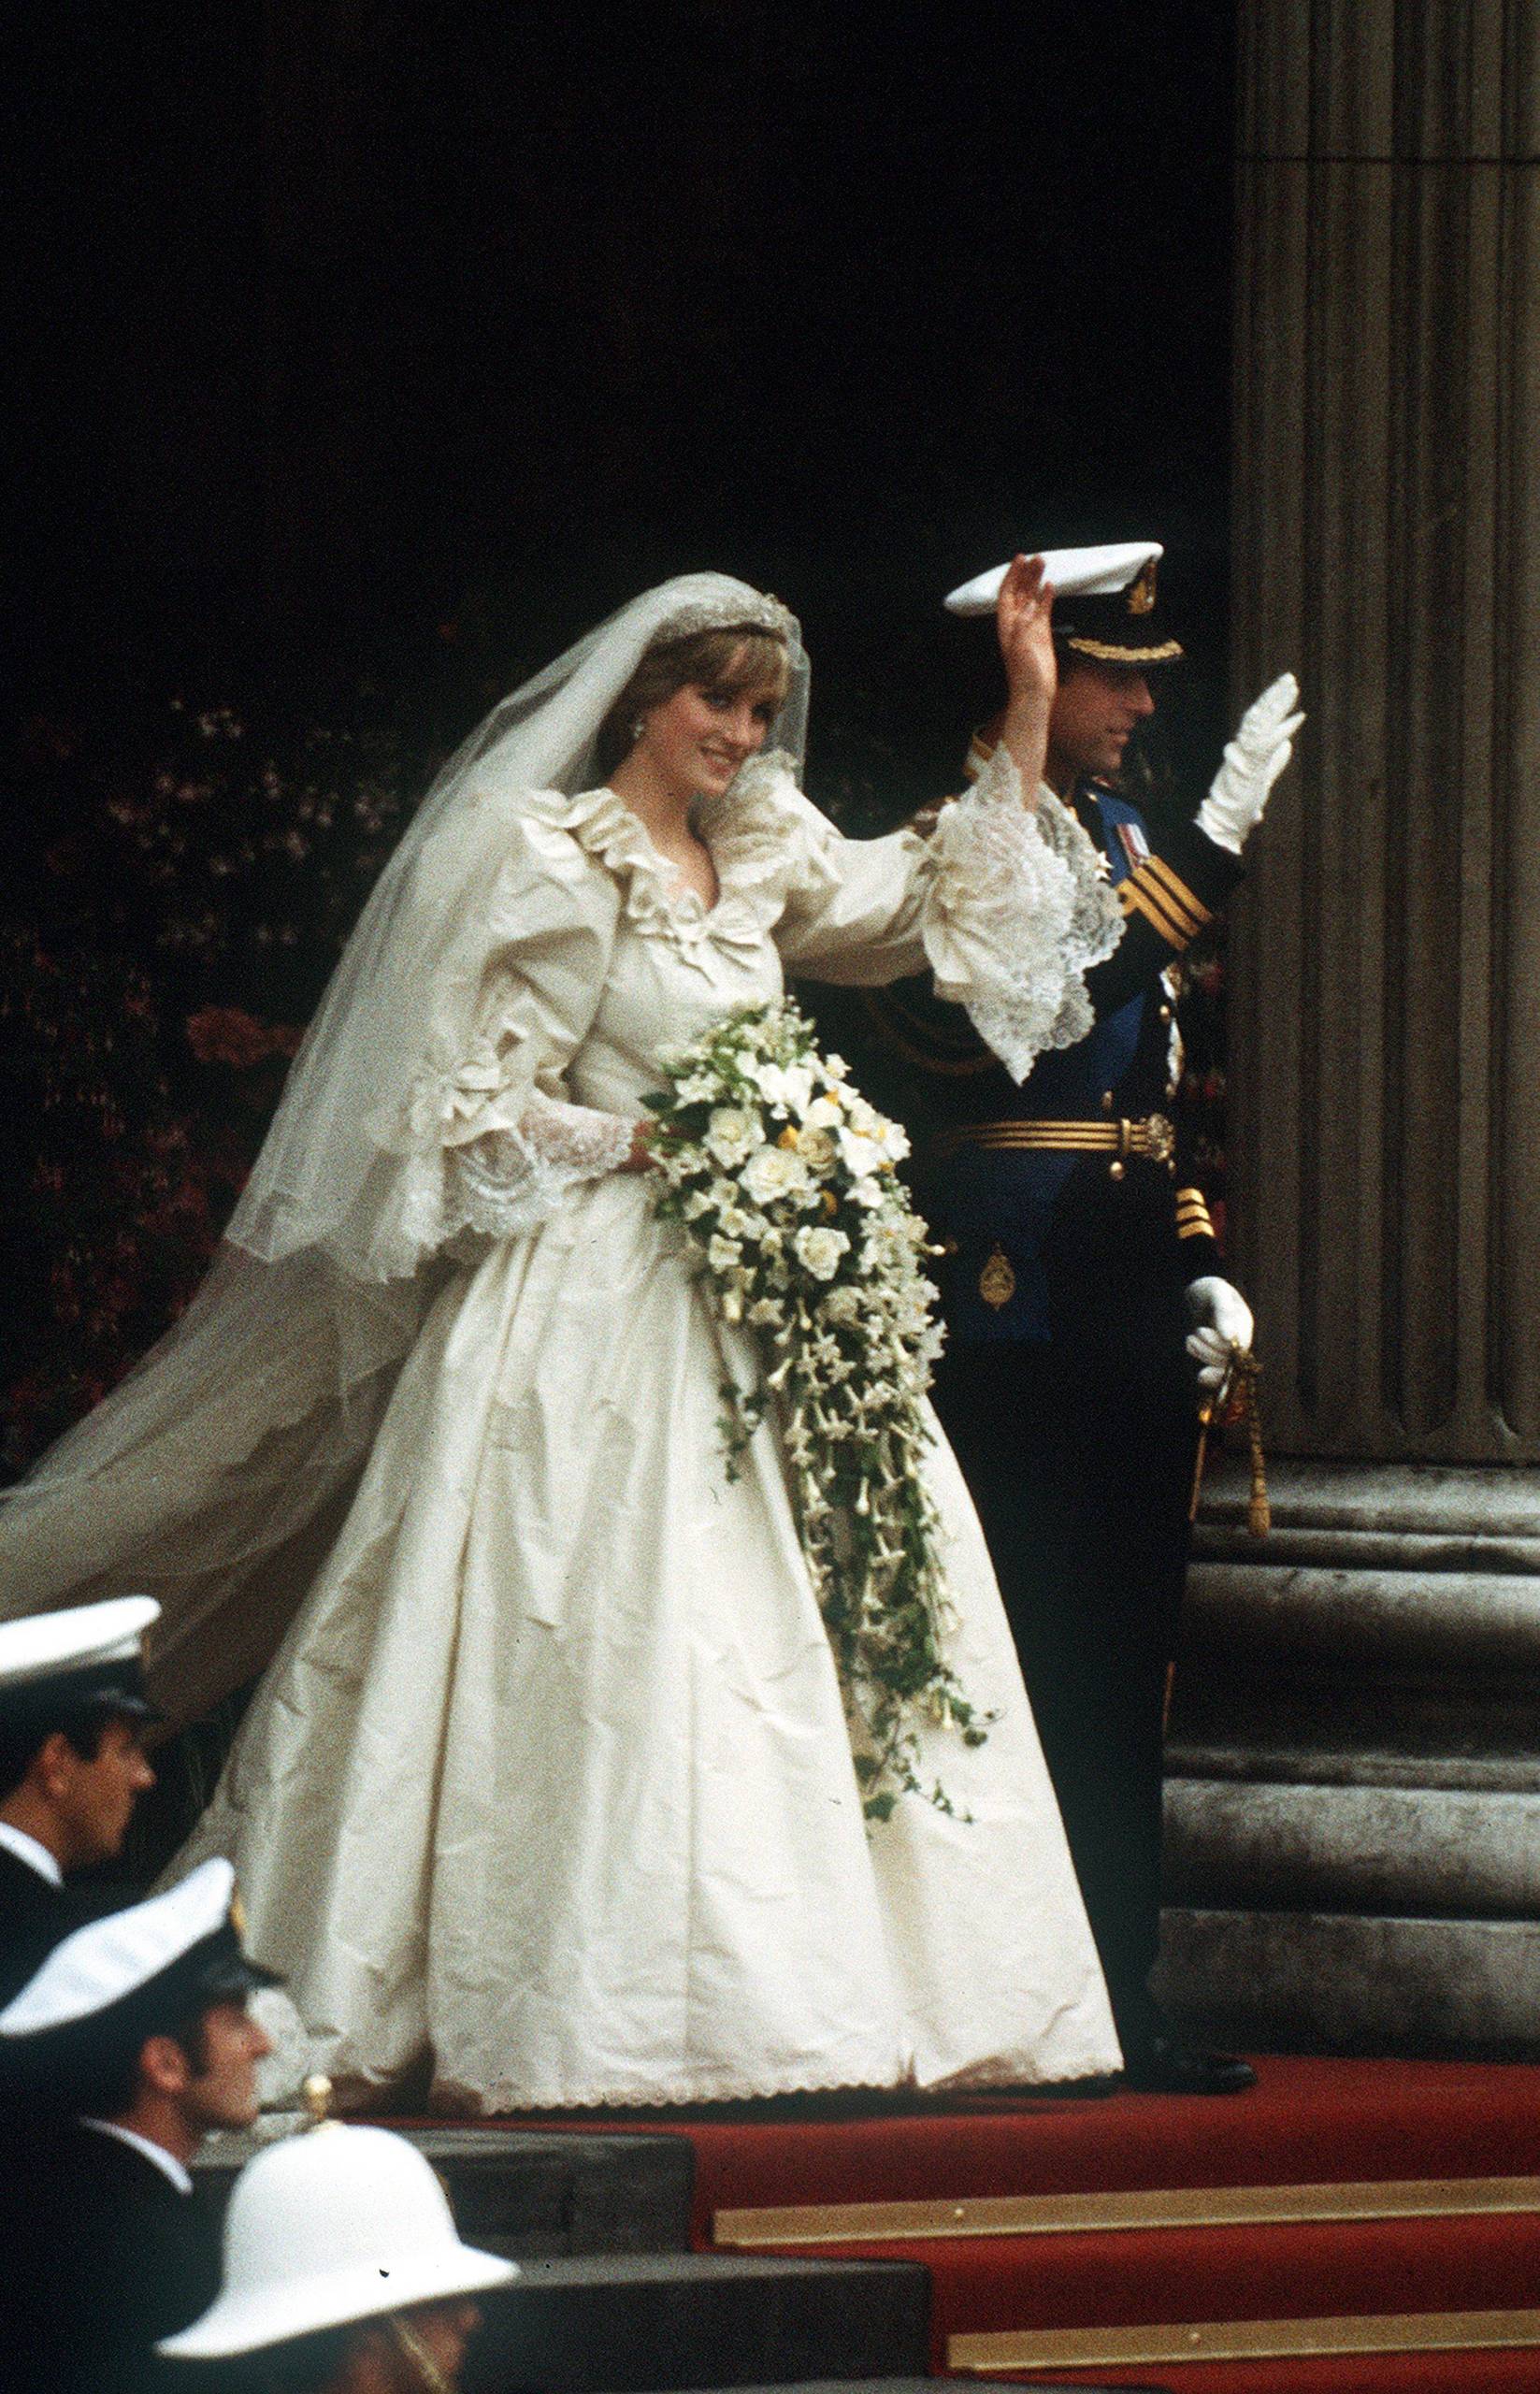 The Prince and Princess of Wales leave St Paul's Cathedral after their wedding, 29th July 1981. She wears a wedding dress by David and Elizabeth Emmanuel and the Spencer family tiara. (Photo by Jayne Fincher/Princess Diana Archive/Getty Images)